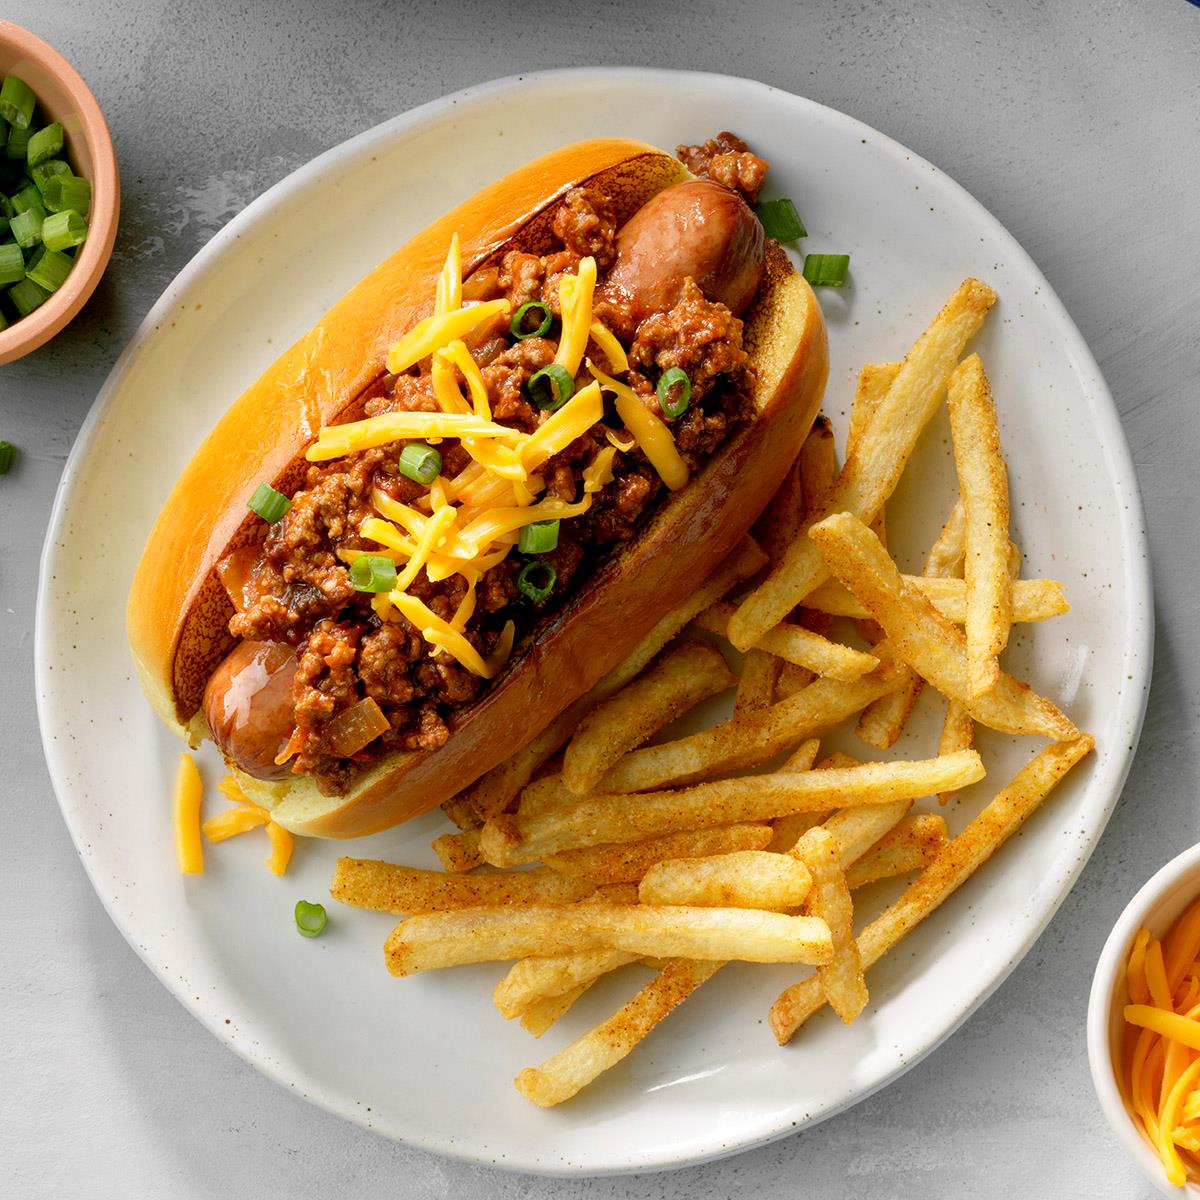 chipotle-chili-dogs-recipe-how-to-make-it